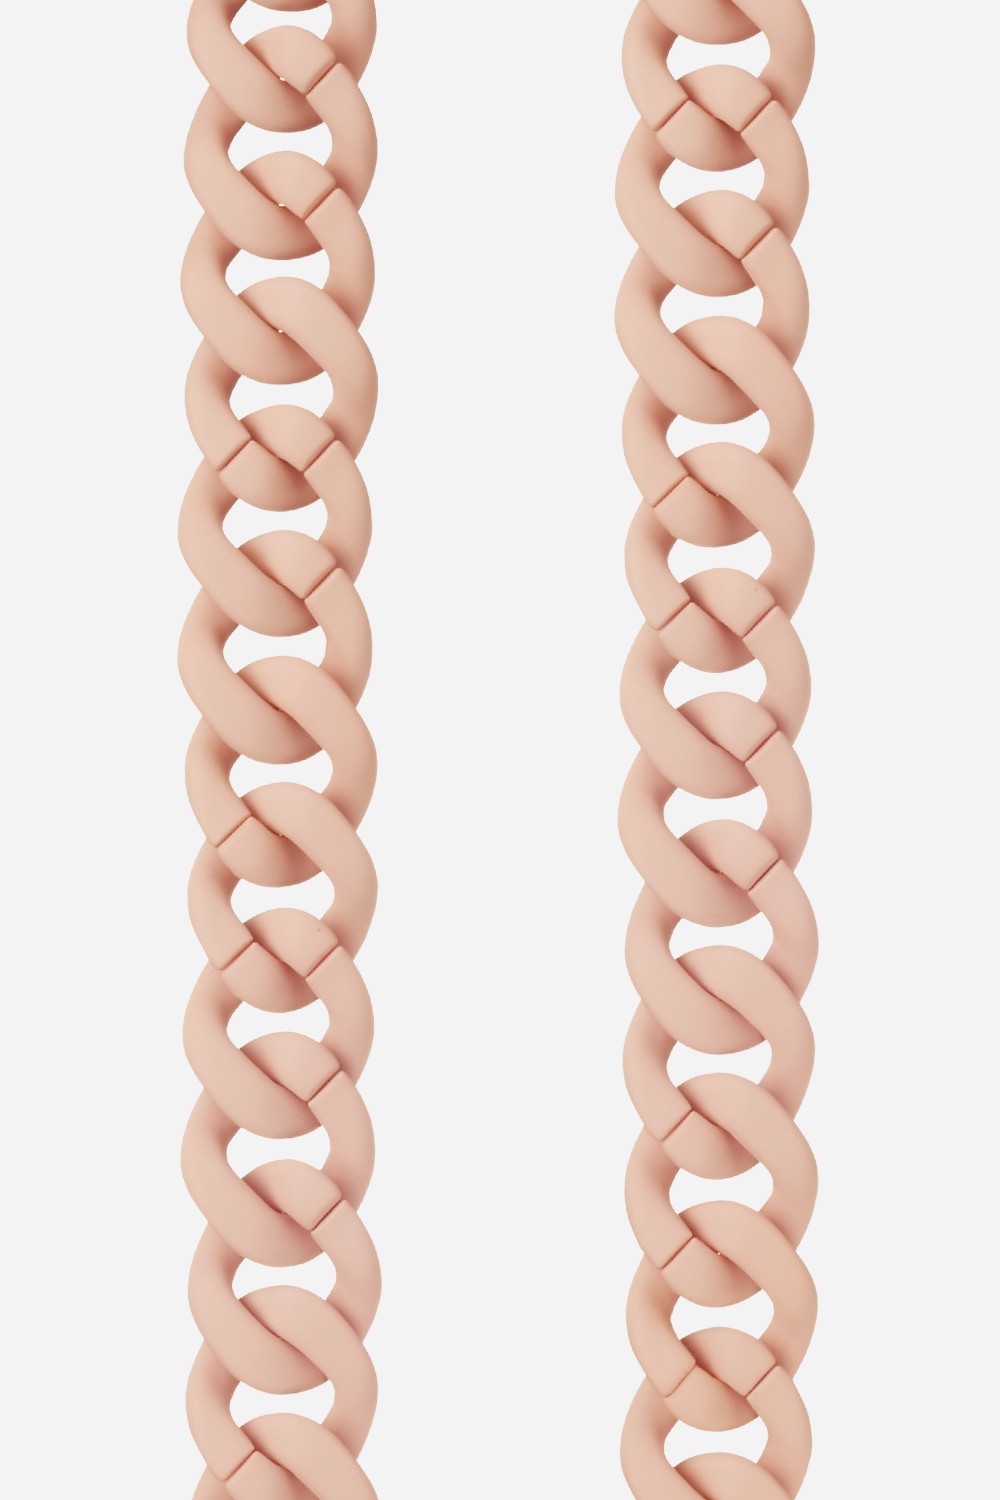 Long Alice Chain Pink 120 cm